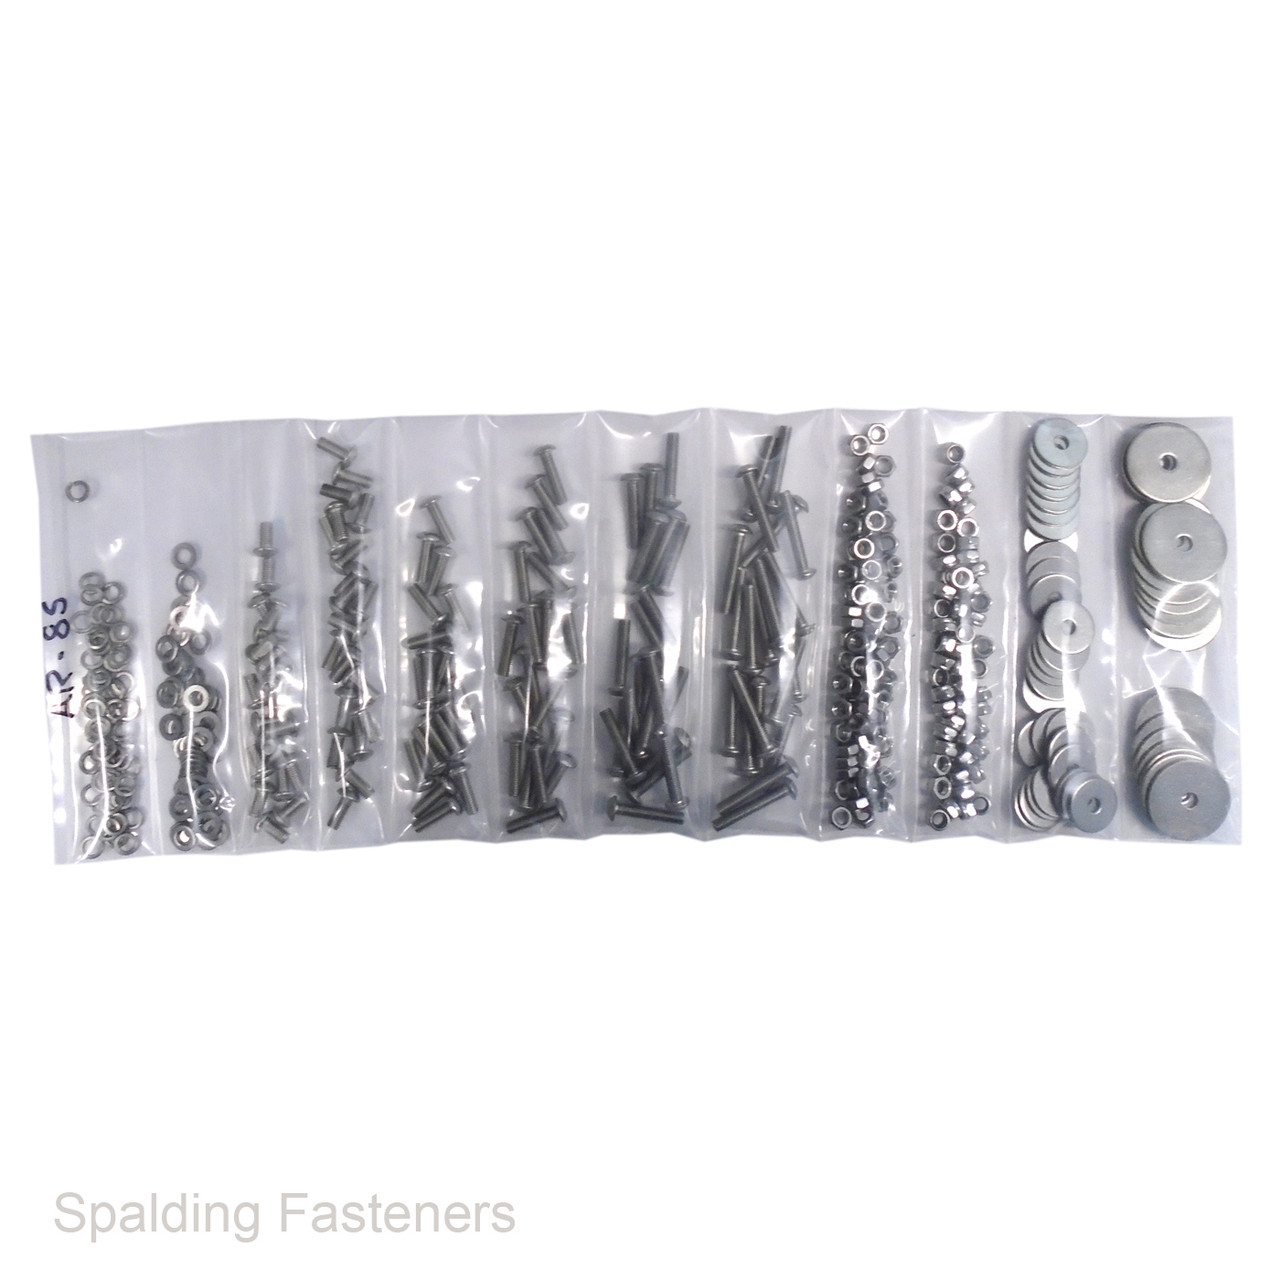 Assorted M5 Metric A2 Stainless Steel Button Head Machine Screws, Nuts & Washers